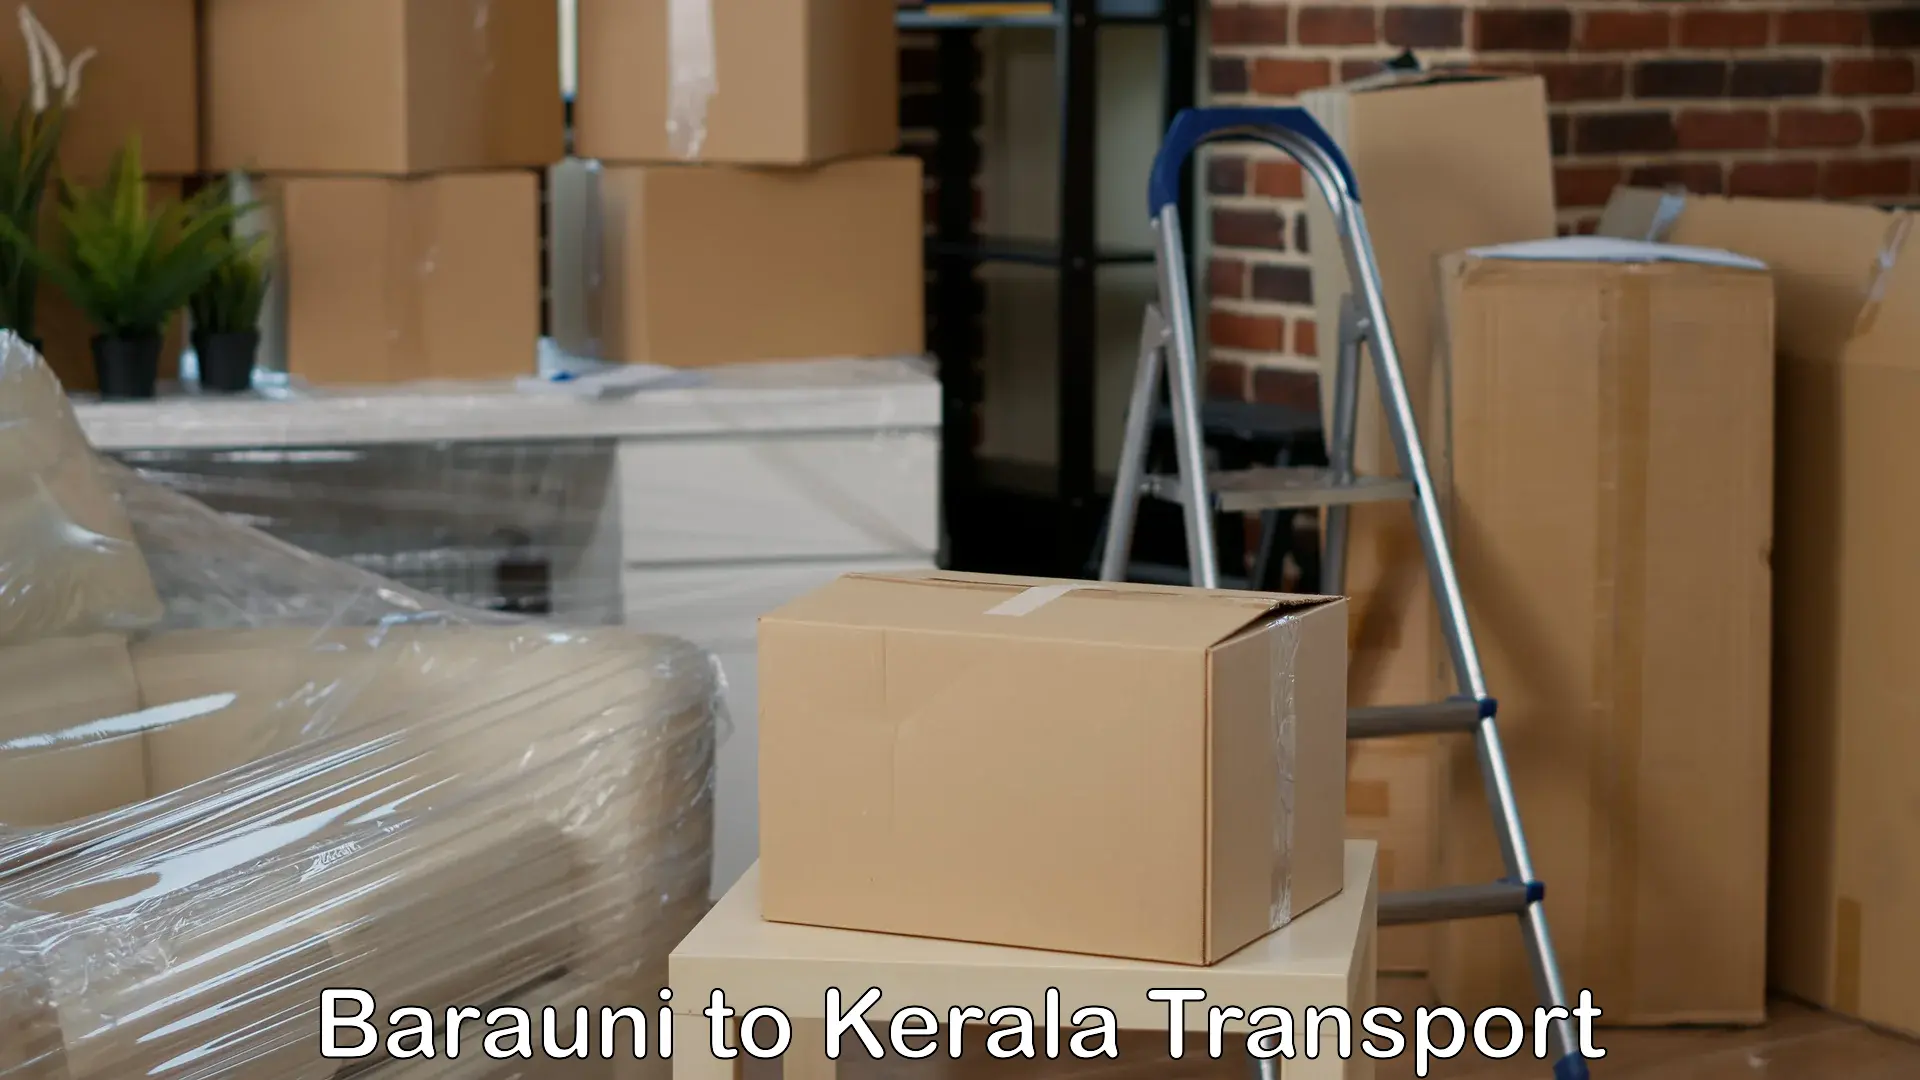 Goods delivery service Barauni to Kerala